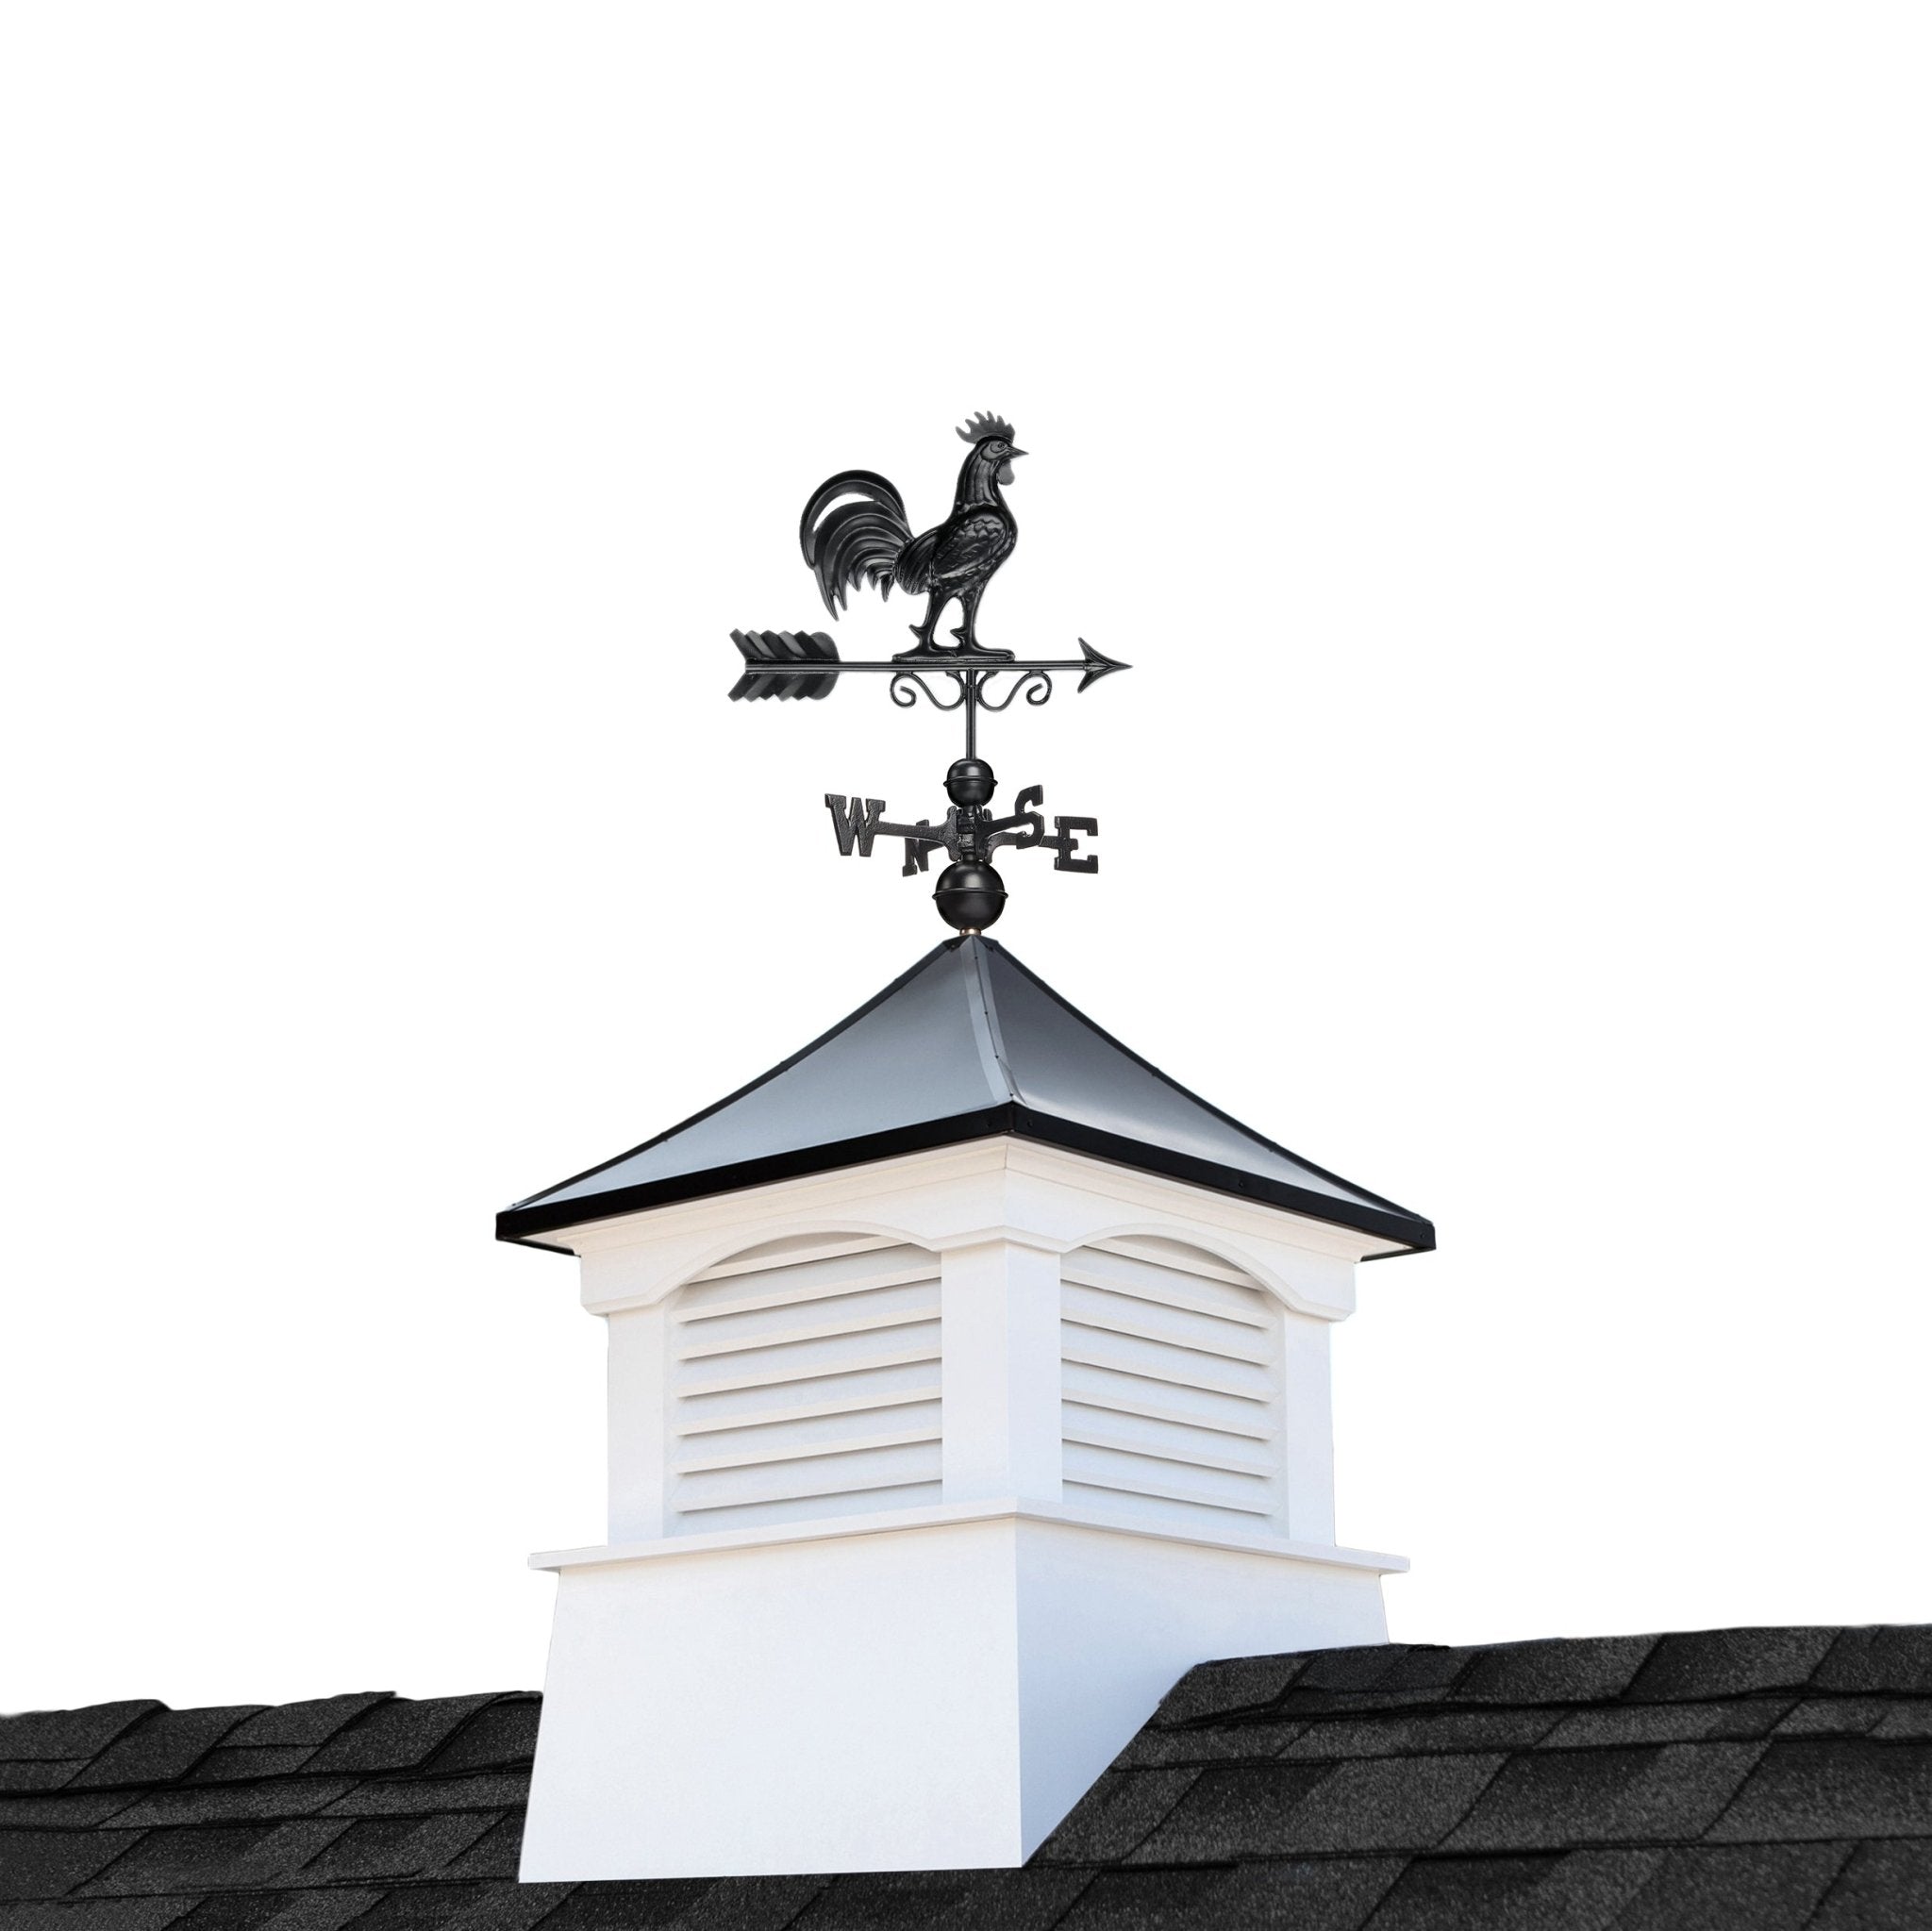 30" Square Coventry Vinyl Cupola with Black Aluminum roof and Black Aluminum Rooster Weathervane by Good Directions - Good Directions